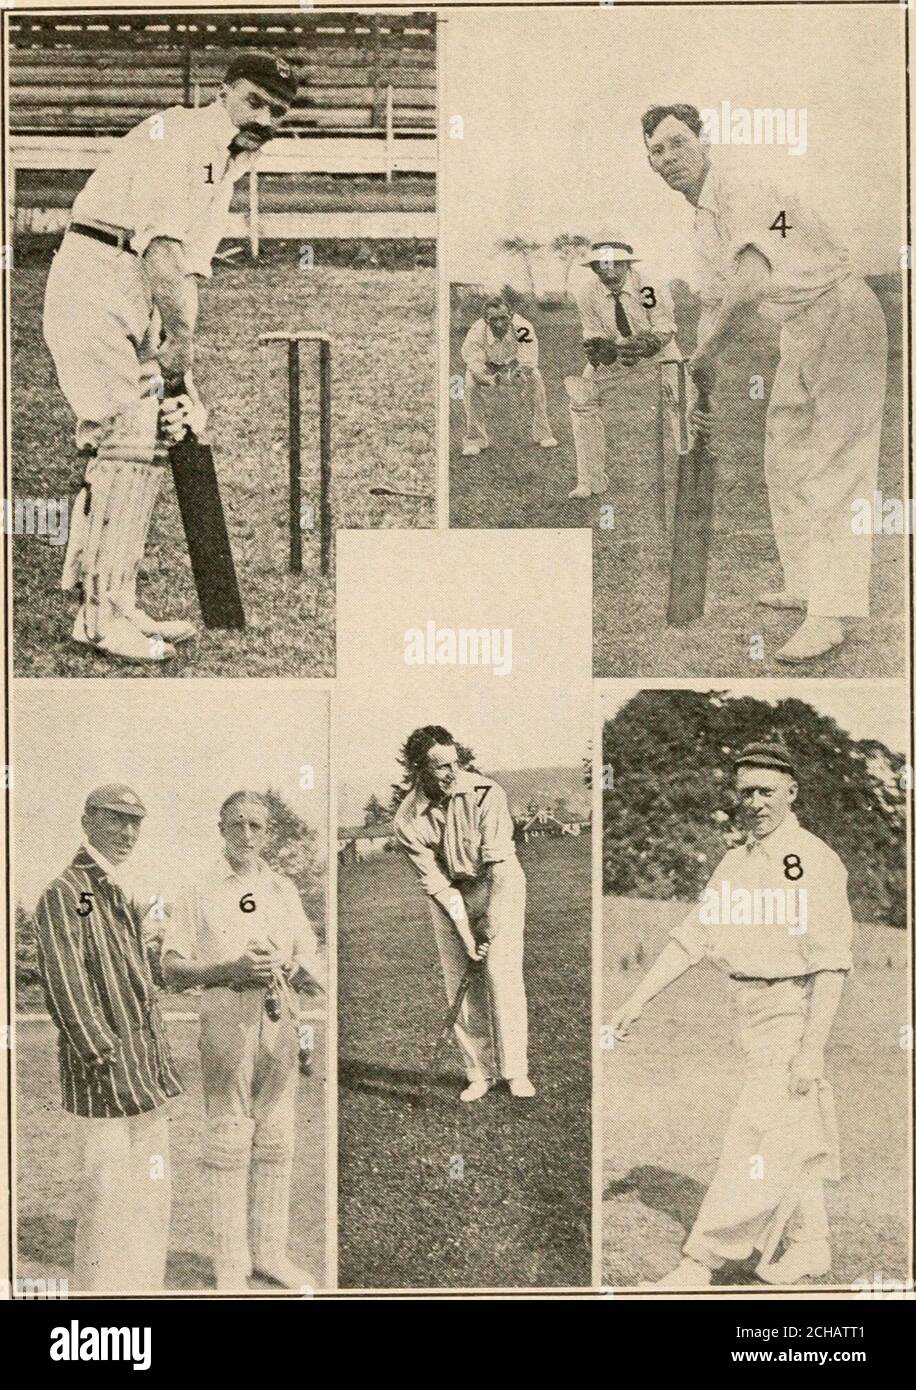 . Spalding's official cricket guide; with which is incorporated the American cricket annual . Moore... BOWLING AVERAGES.B. M. R.W.Aver. 96 5 20 7 2.6048 0 30 7 4.20544 12 223 45 4.70 J. W. Gill.W. Bates.. B. M. R.W.Aver.208 3 119 18 6.1119S 5 74 12 6.20. 1, Kenneth Weaver. Prince All.erf CC Saskatehewaii: 2. George tUpyisuu,3, R. Barrett; 4, H. Vigglesw.,rth. Secretary Stratford CC; o, P. W. John-son, St. Johns CC, Calgary; 15, V. P. Barnett. Calgary (.C; ., C Bigg^,New Westminster CC; 8. L. H. Miller, New Westminster CC.A GROUP OF CANADIAN PLAYERS. SPALDINGS OFFICIAL CRICKET GUIDE. 131 ST. G Stock Photo